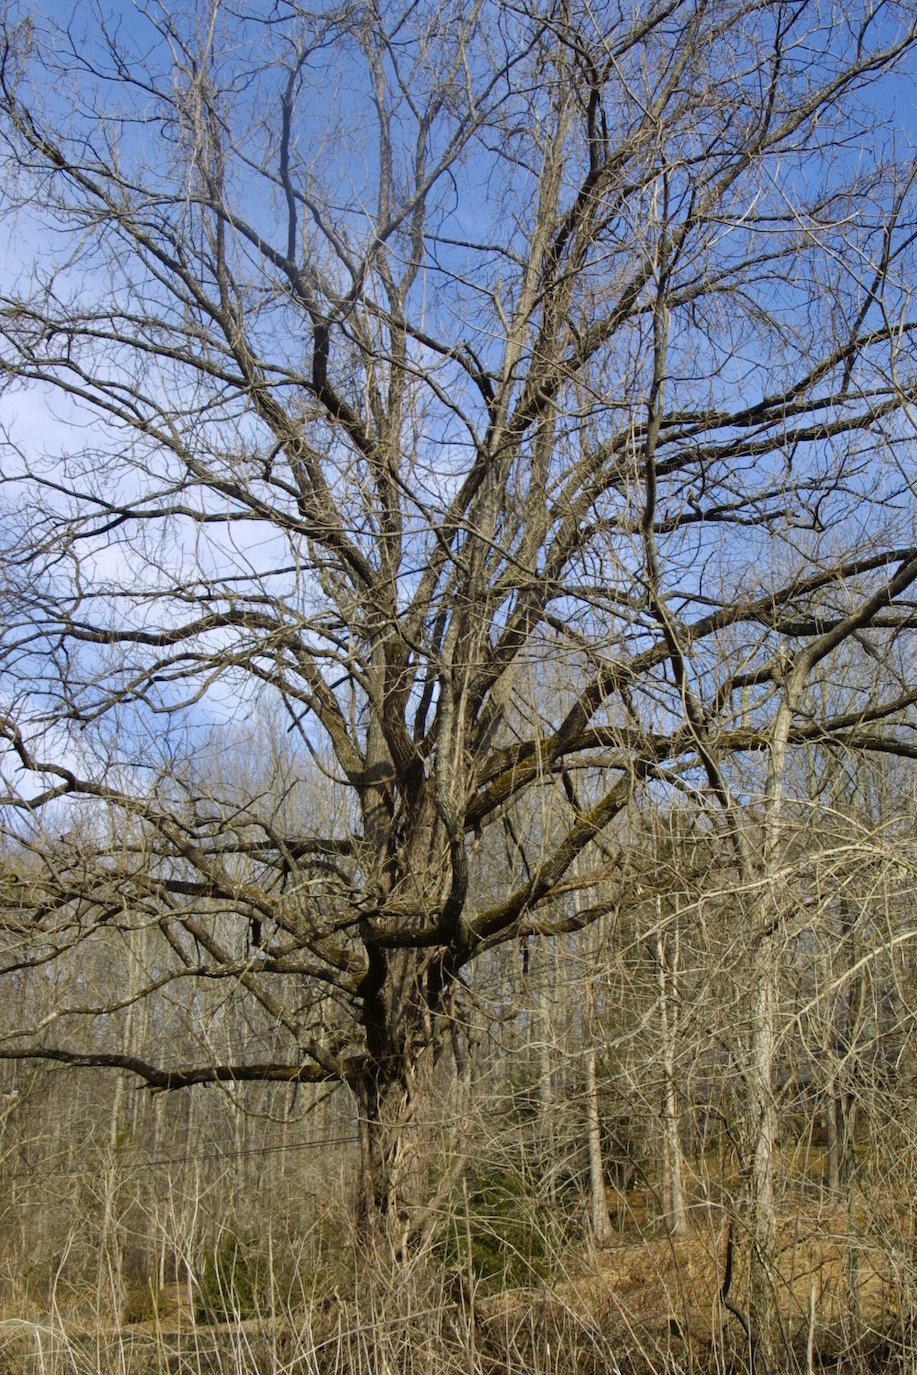 The Scientific Name is Juglans nigra. You will likely hear them called Black Walnut. This picture shows the Large tree with stout trunk and branches; forms a broad crown of Juglans nigra